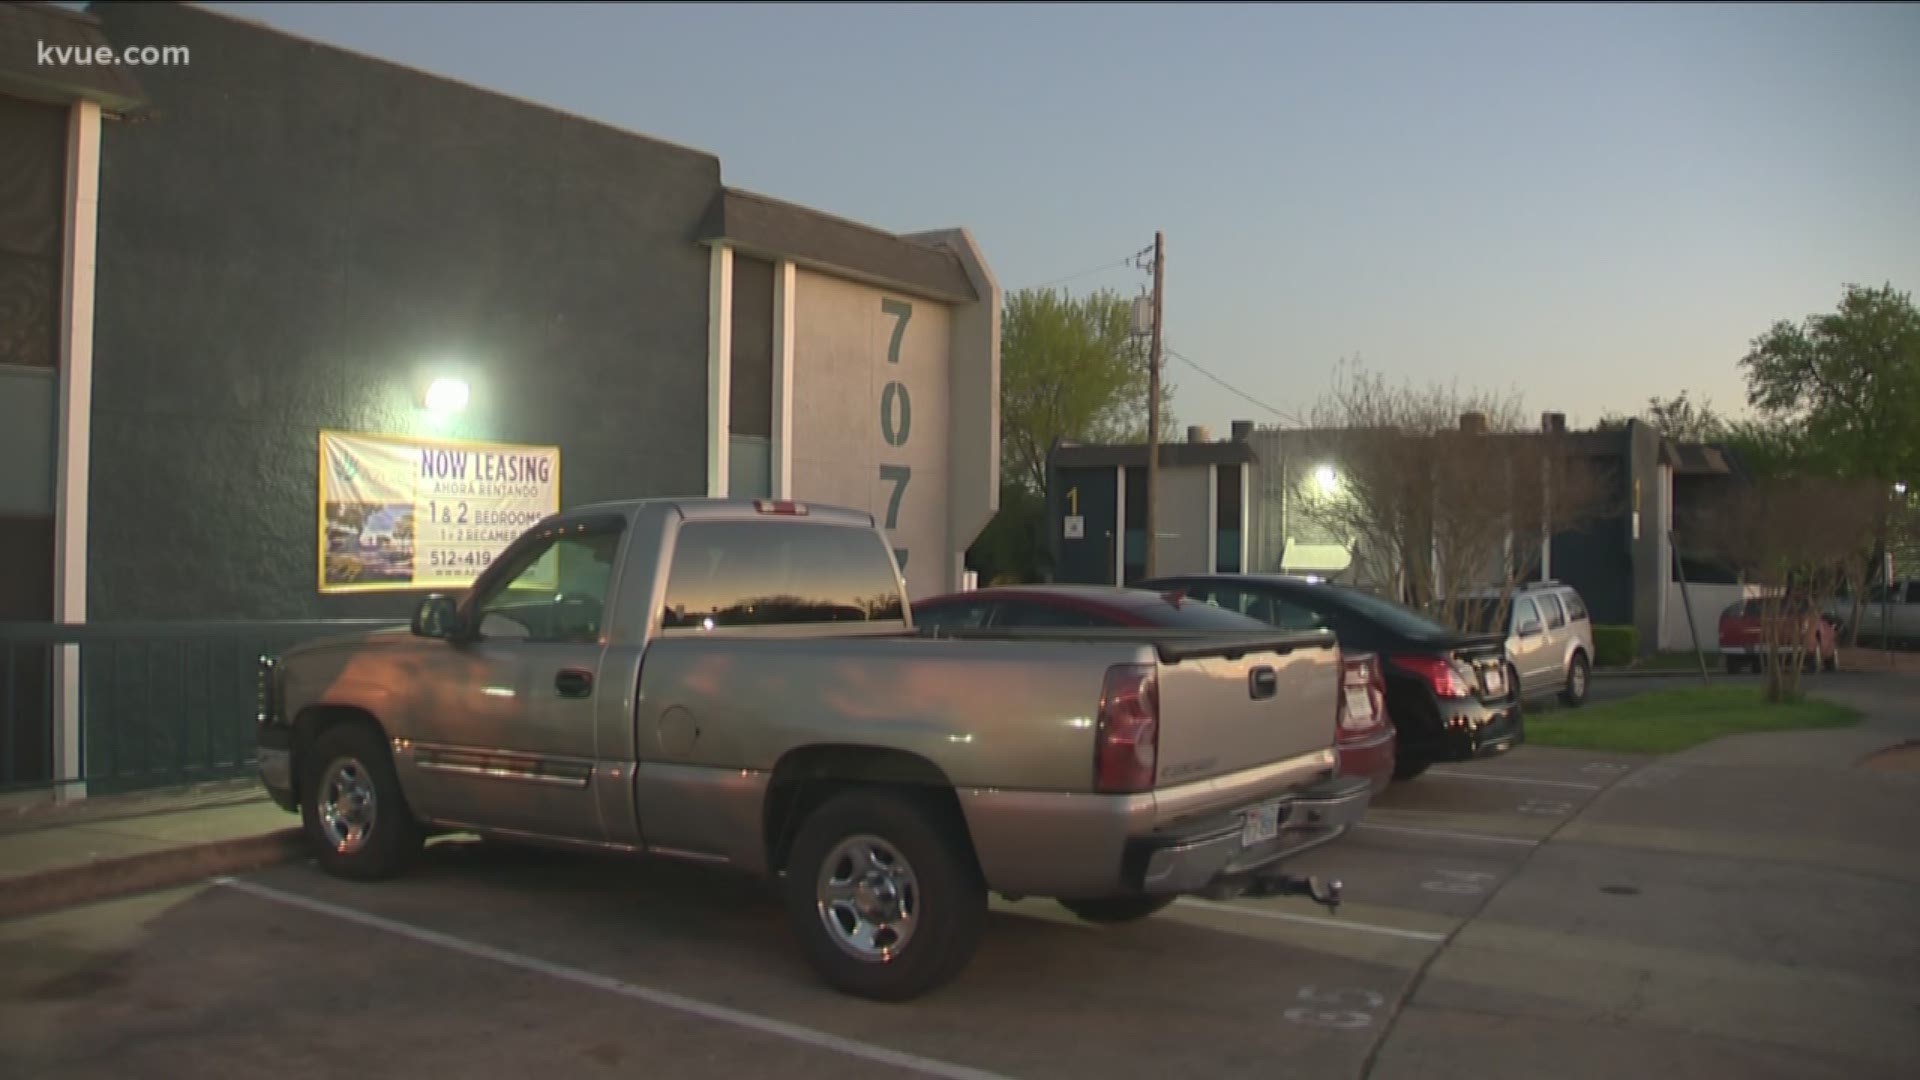 Austin police want to find a man accused of kidnapping and sexually assaulting a woman.